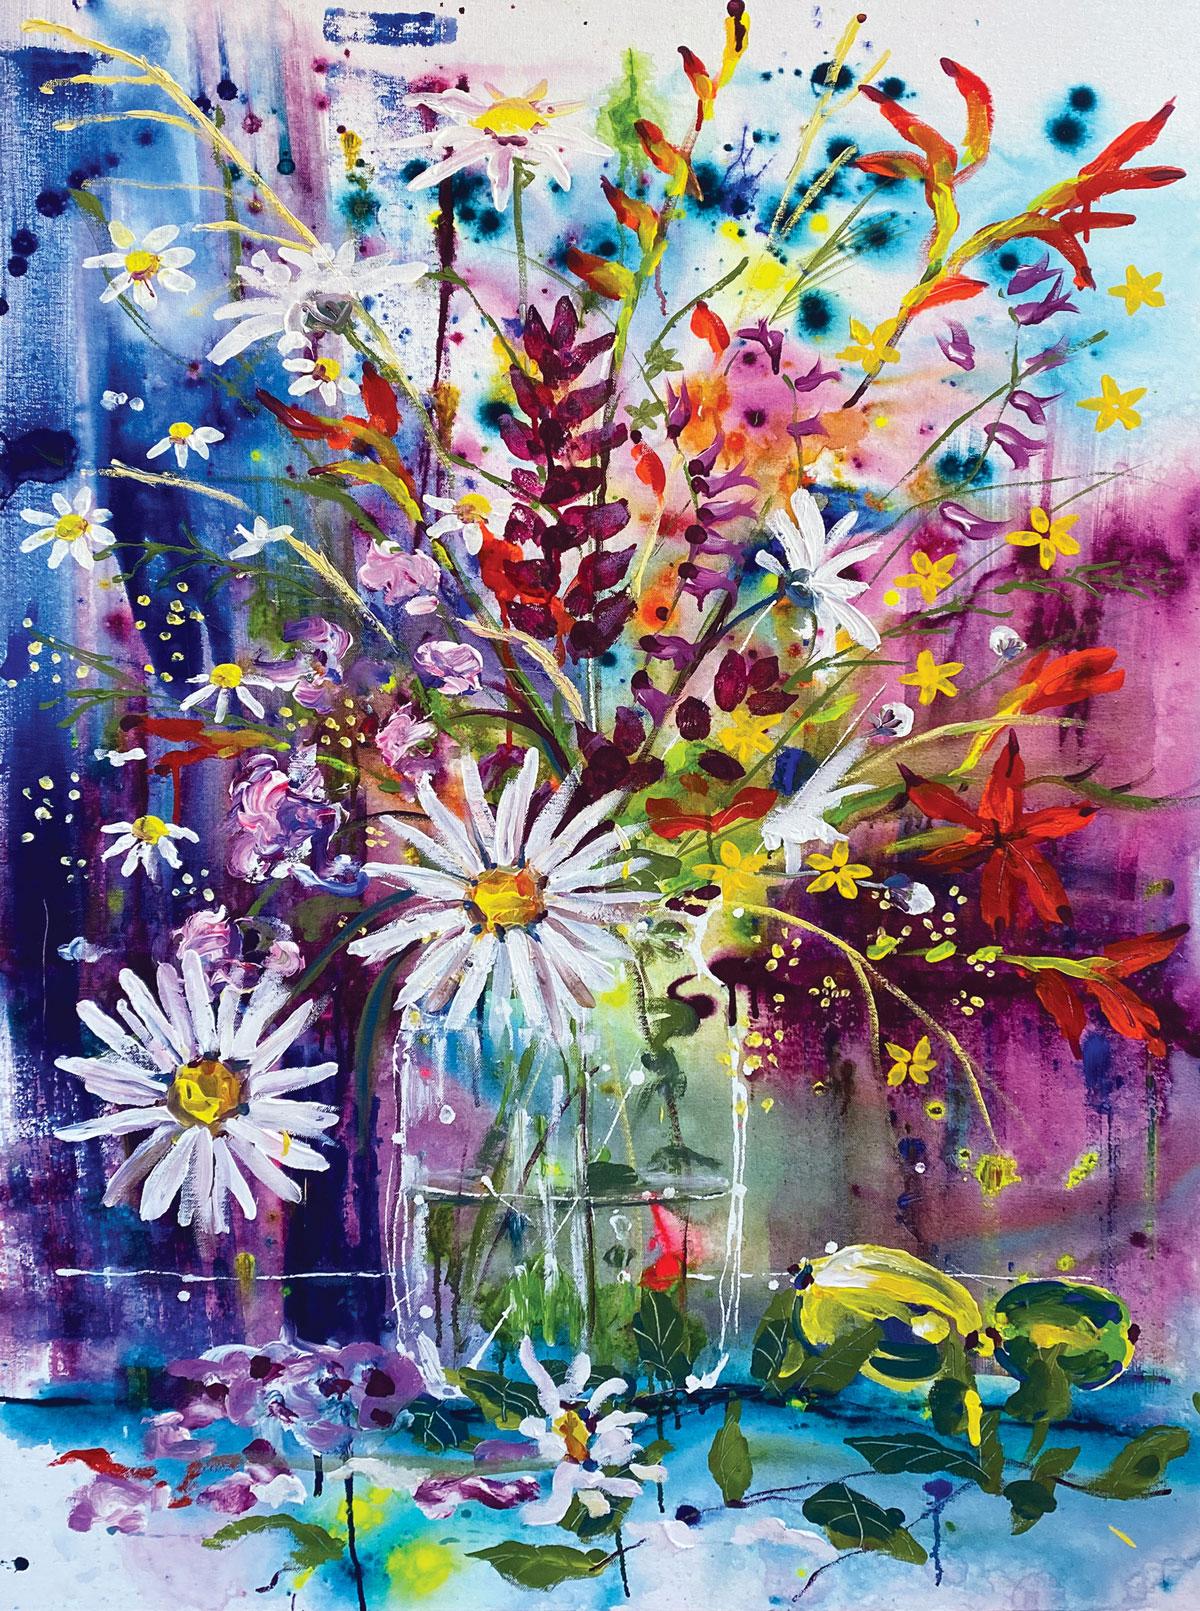 Flower Festival is inspired by the wild flowers that Rachael picks from her garden in the Norfolk countryside. She spends many days here where her studio is hidden.

Rachael Dalzell’s paintings are colourful and expressive.  Her free and lively use